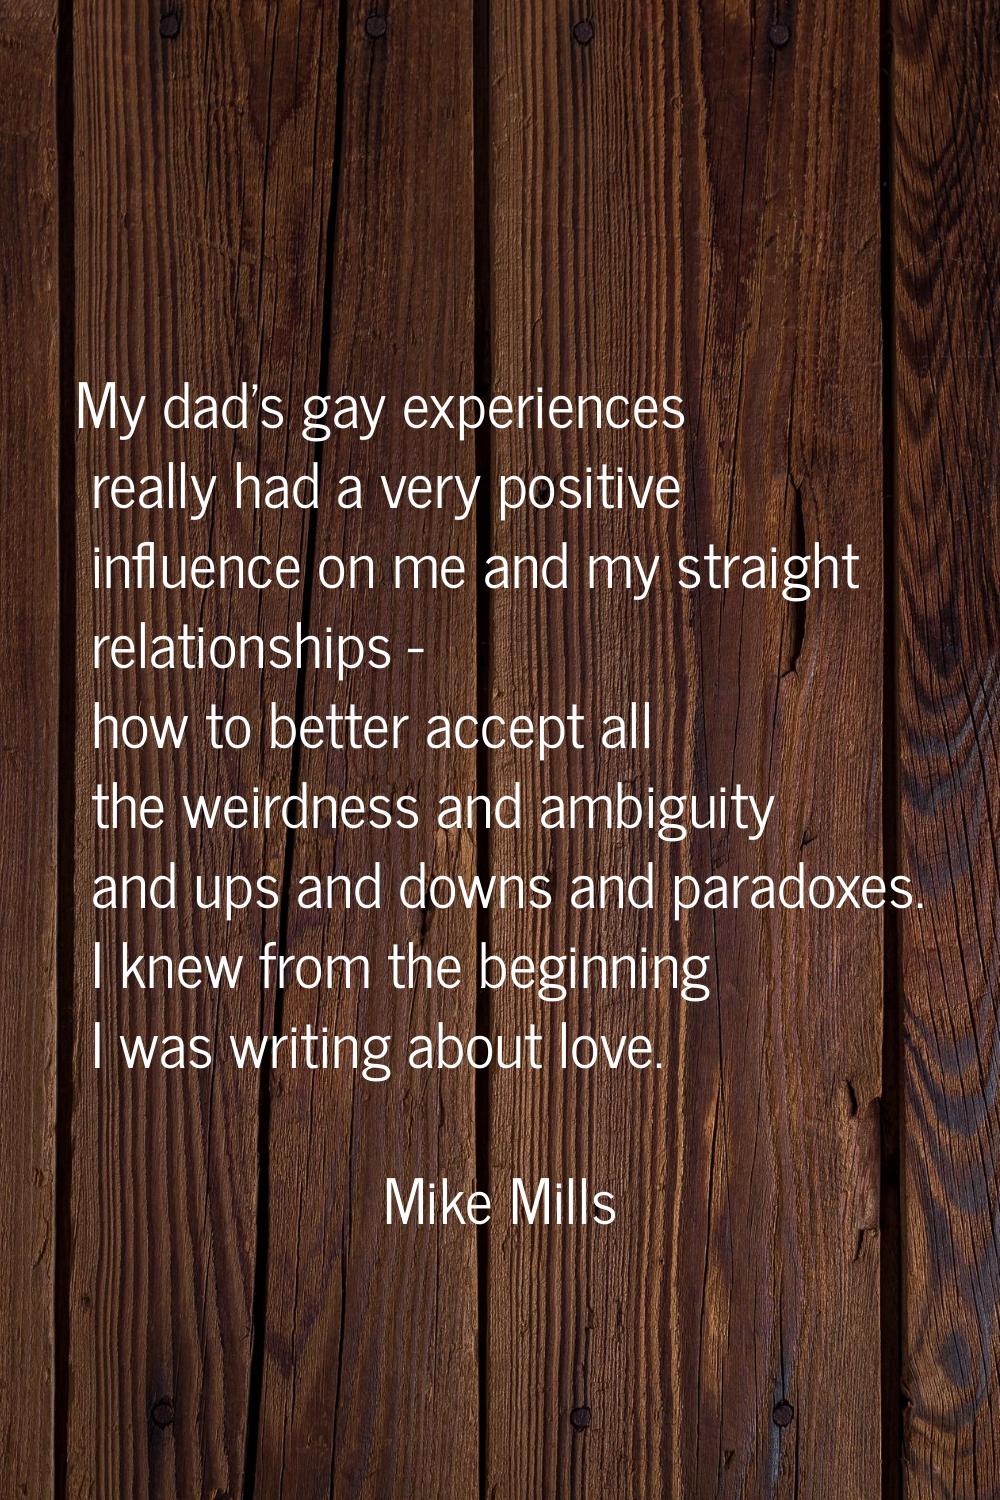 My dad's gay experiences really had a very positive influence on me and my straight relationships -